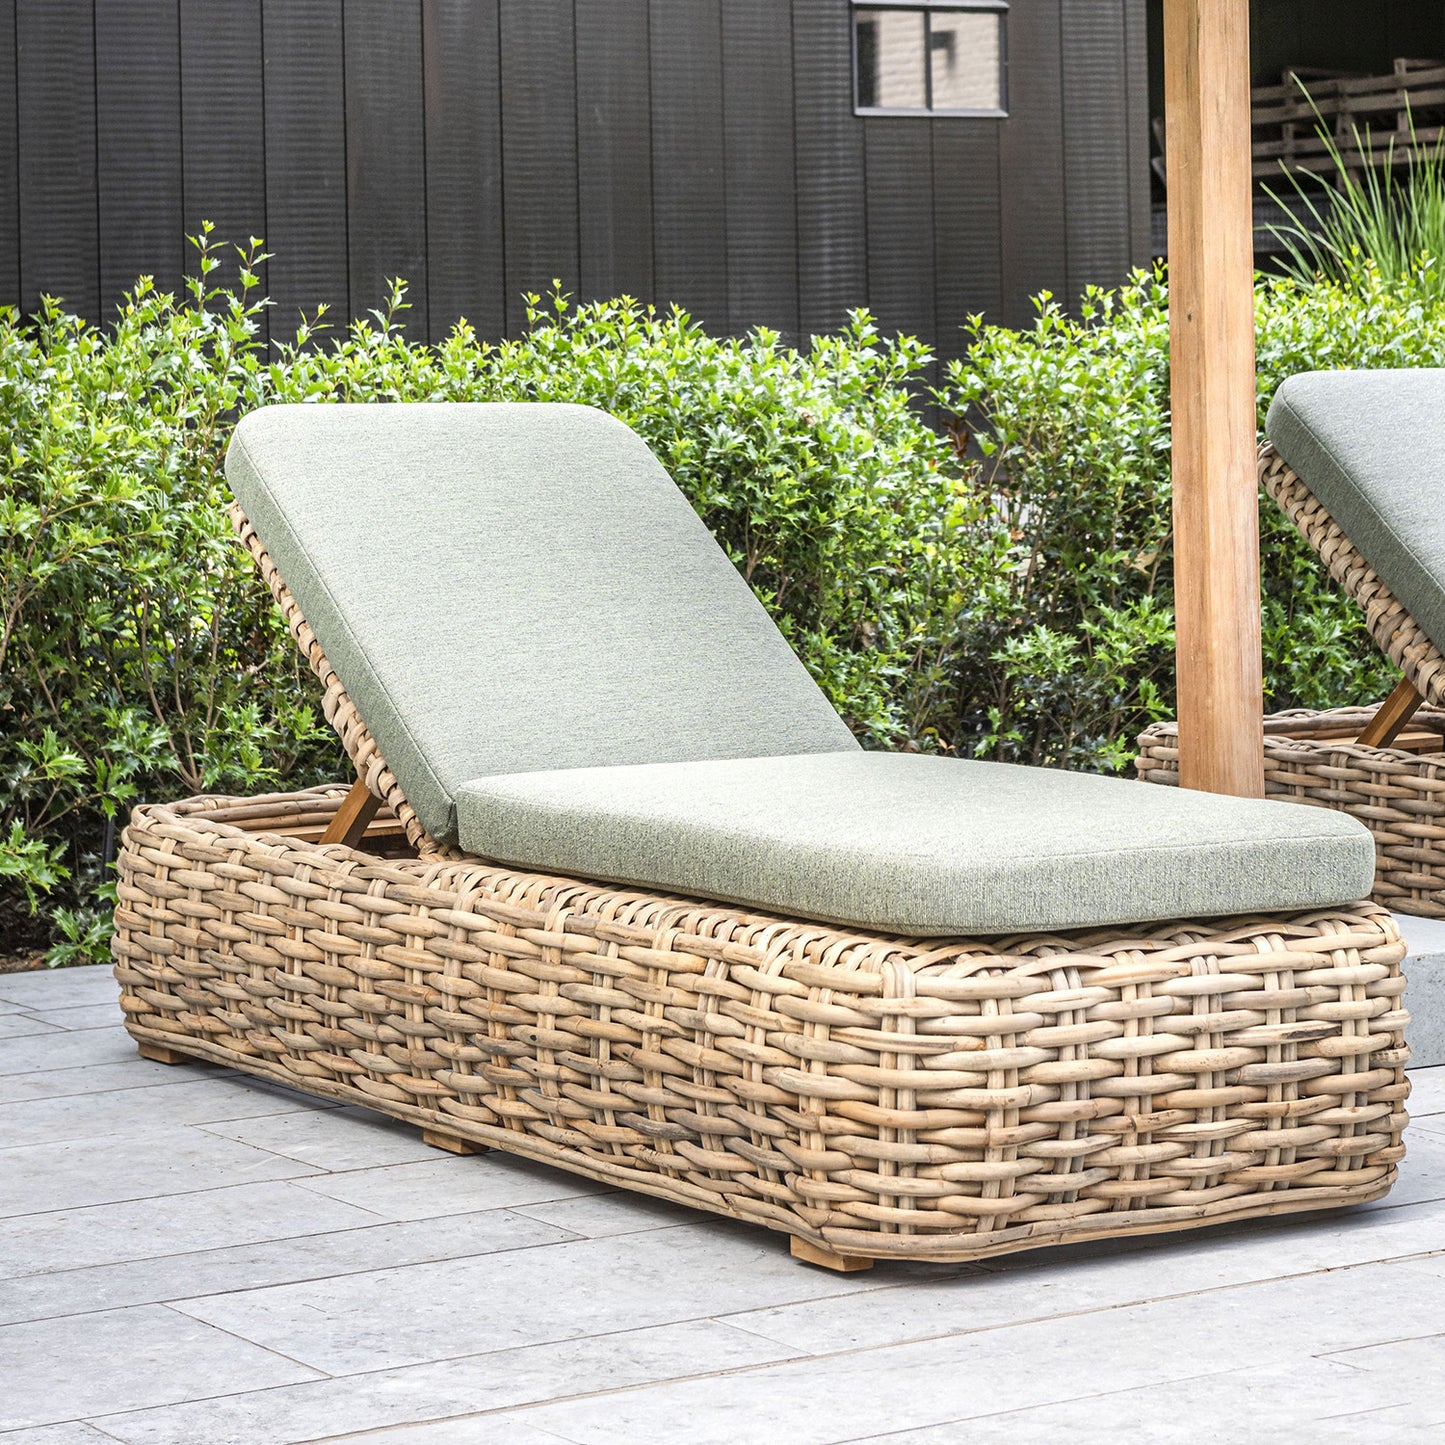 Woven wood sun lounger with gray cushion 